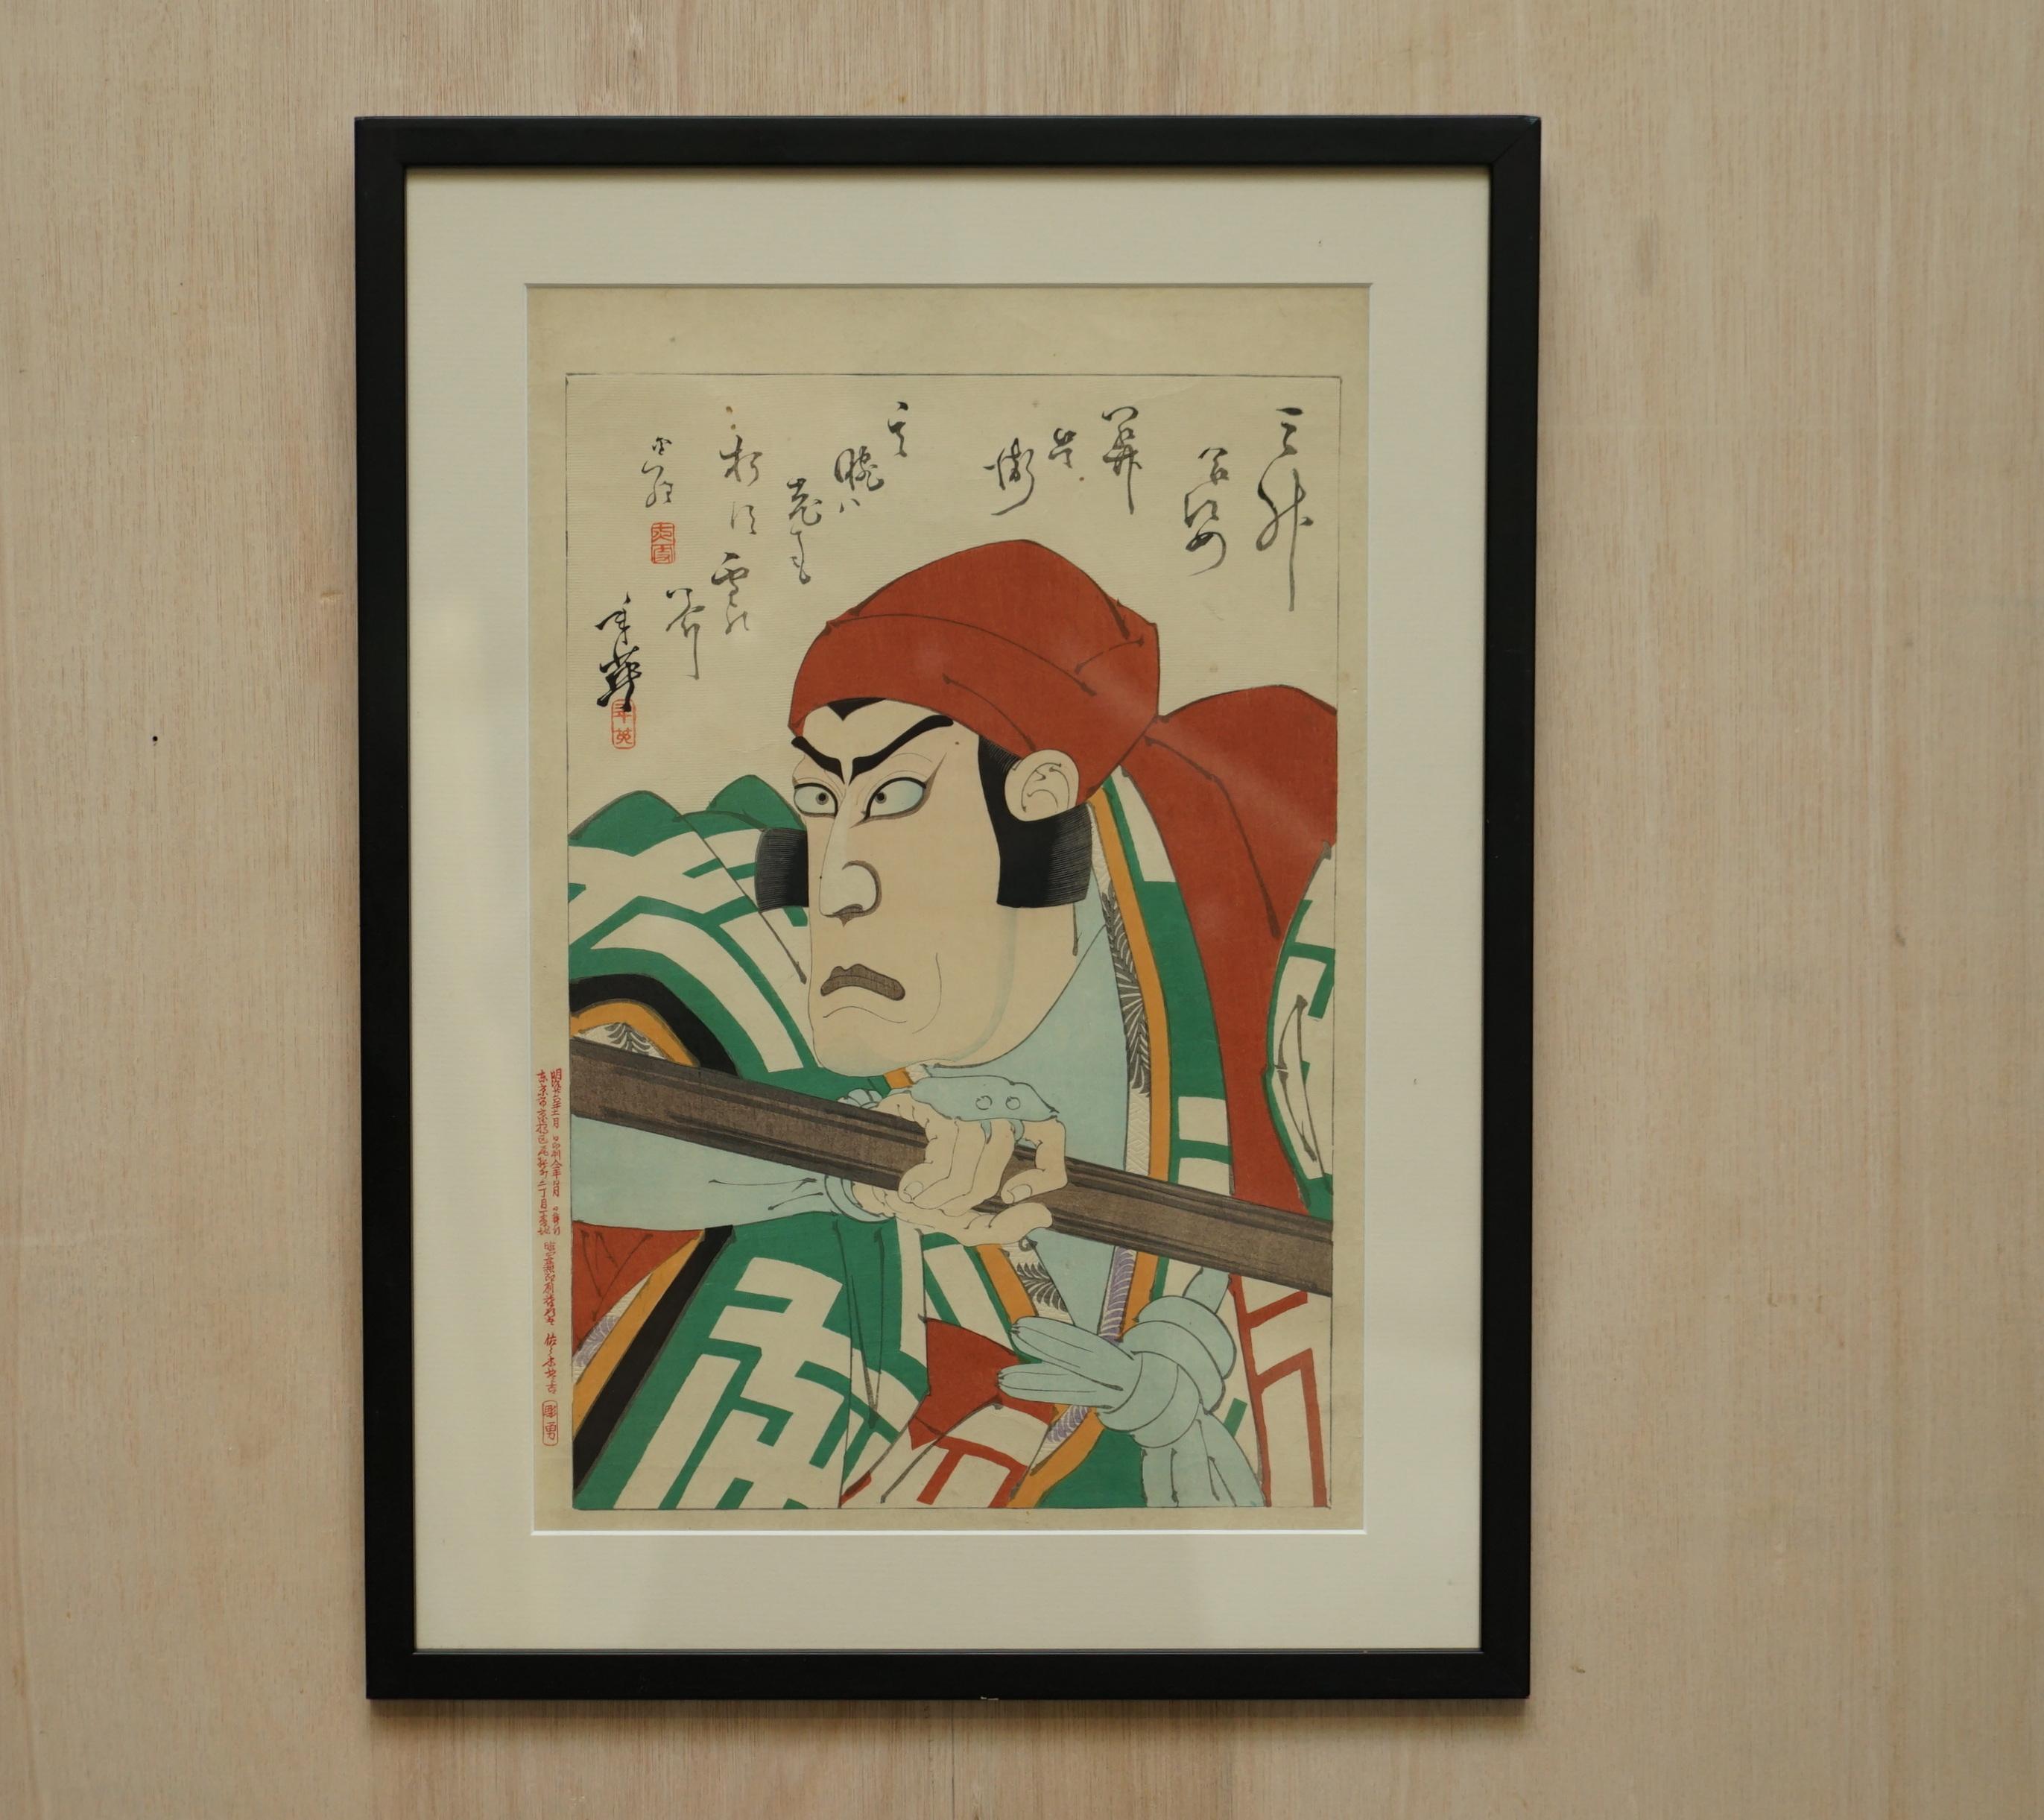 We are delighted to offer for sale this suite of four original 19th century Master Migita Toshihide (1863-1925) Portraits of Sansho (Ichikawa Danjuro IX) Japanese signed wood block prints

A truly stunning suite, all four are original and are very